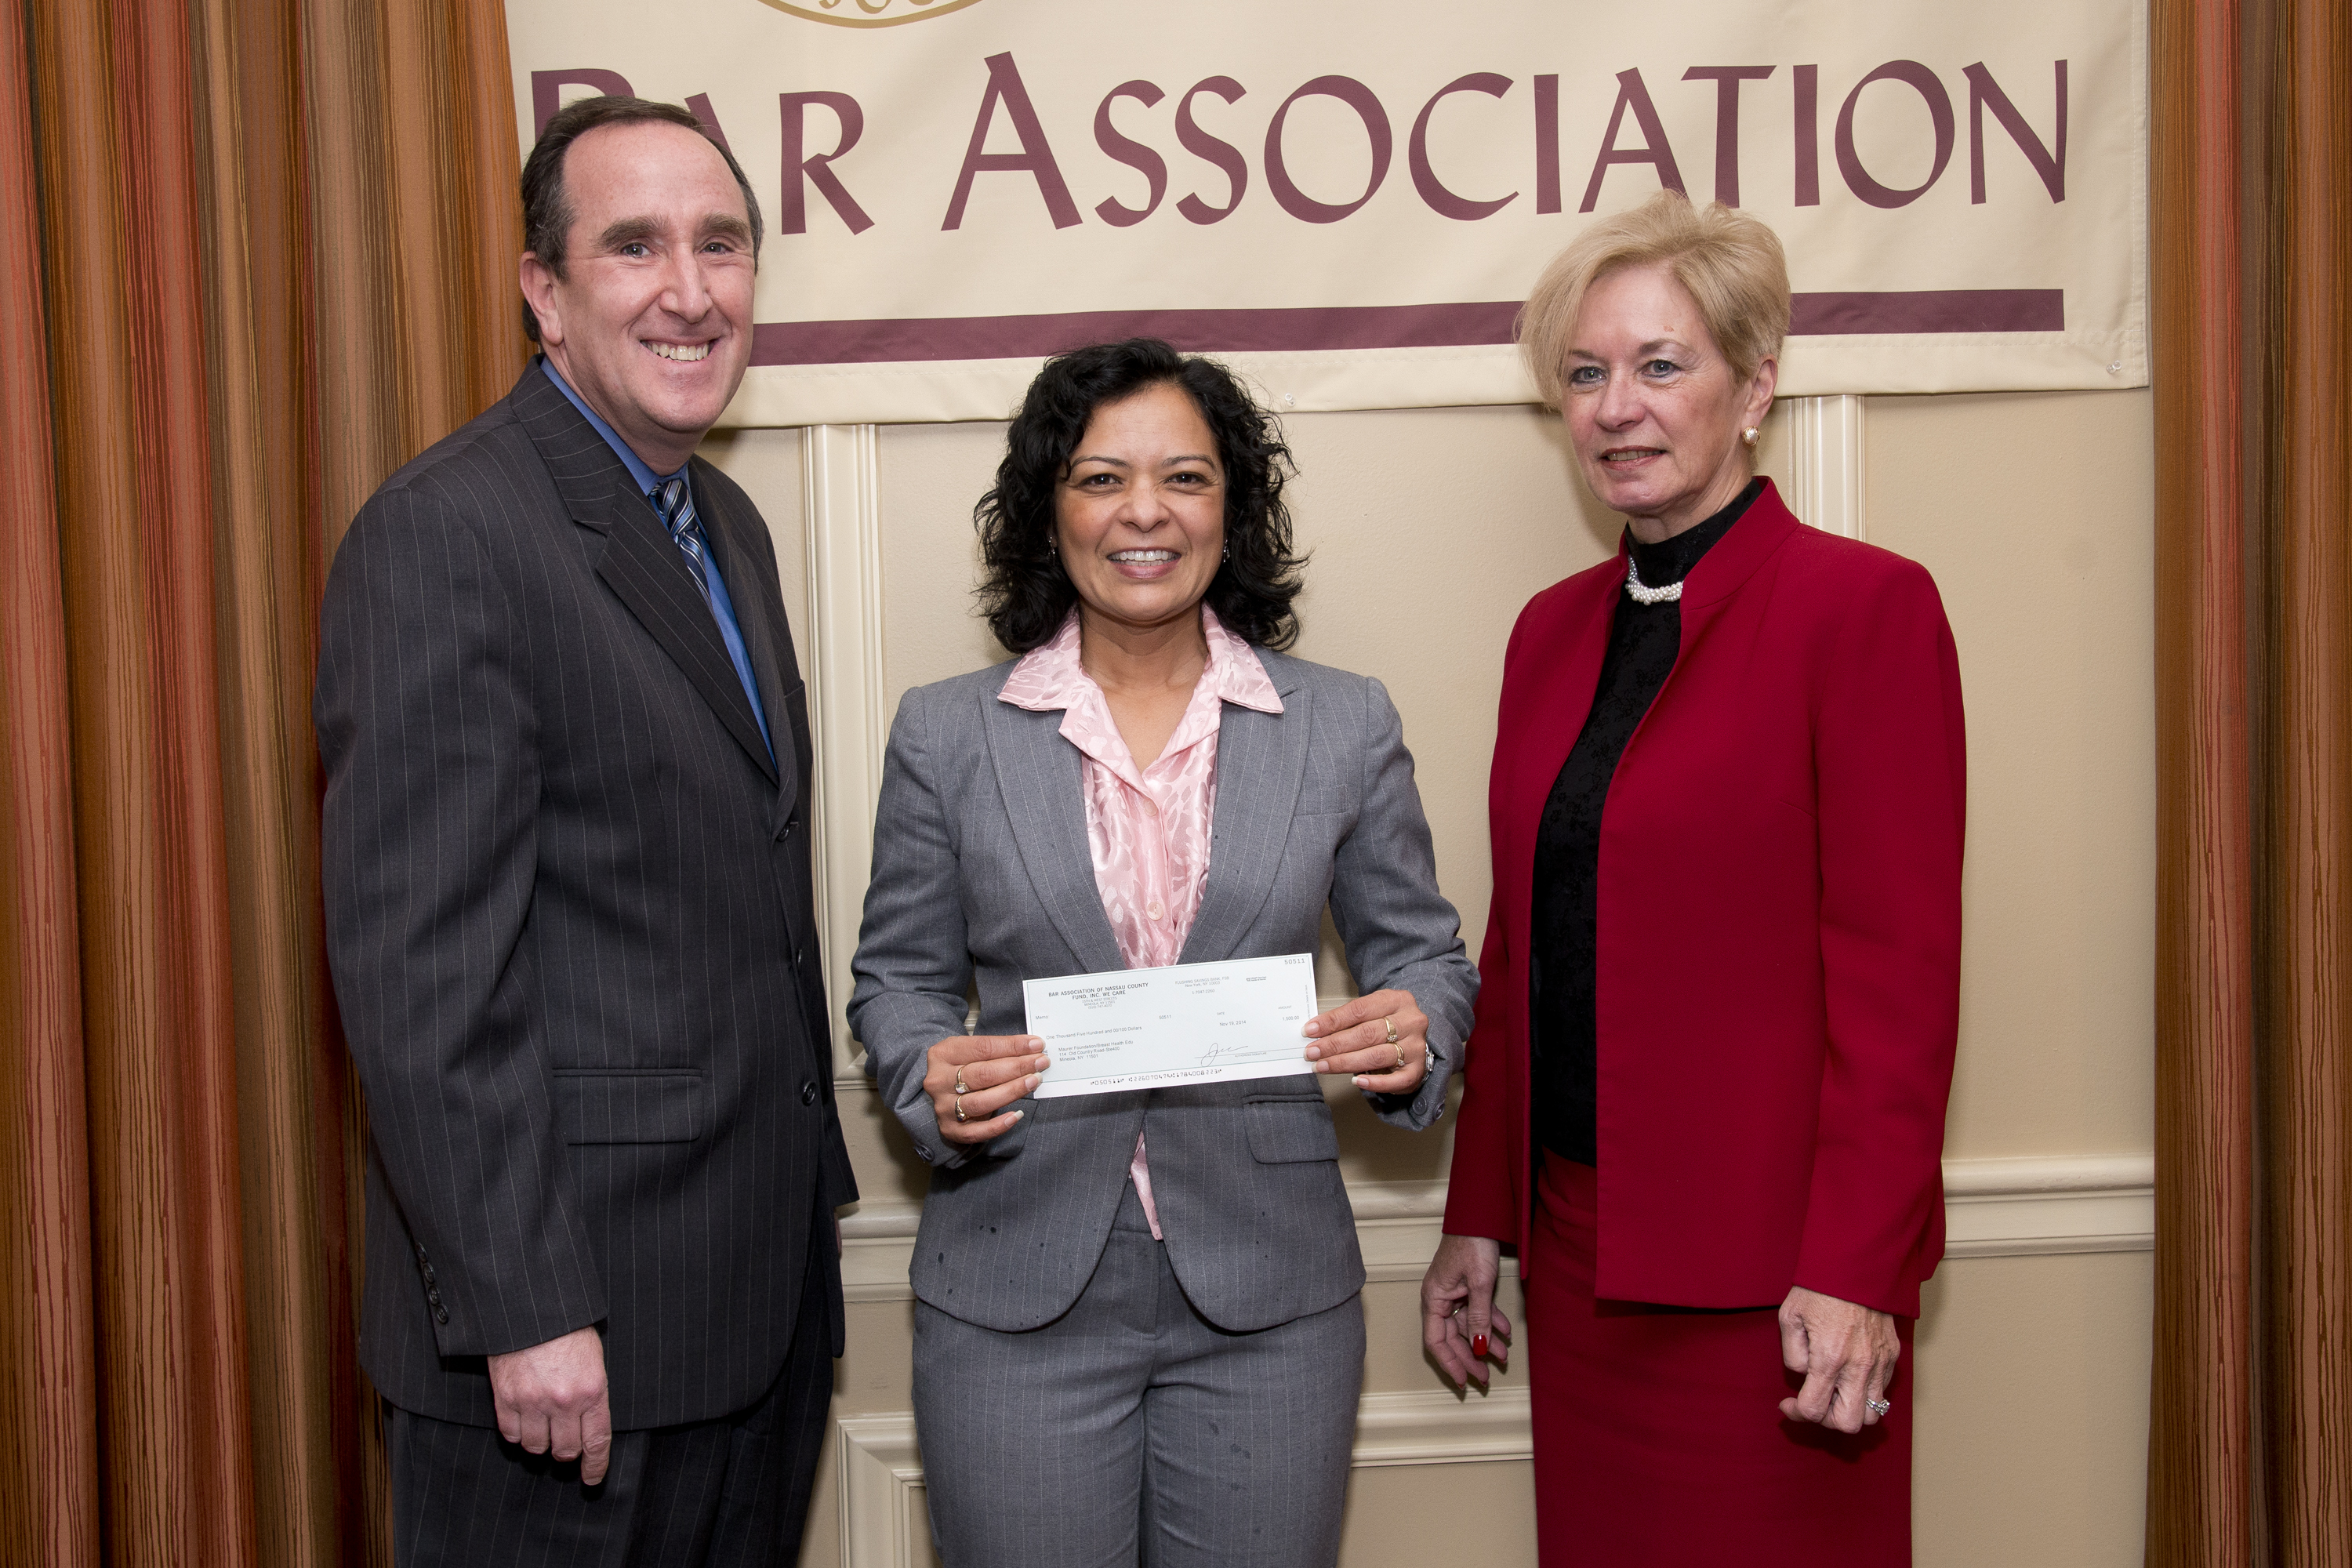 Maurer Foundation Executive Director Susan Samaroo accepts the check from Peter Levy & Kathleen Wright of the Nassau County Bar Association.